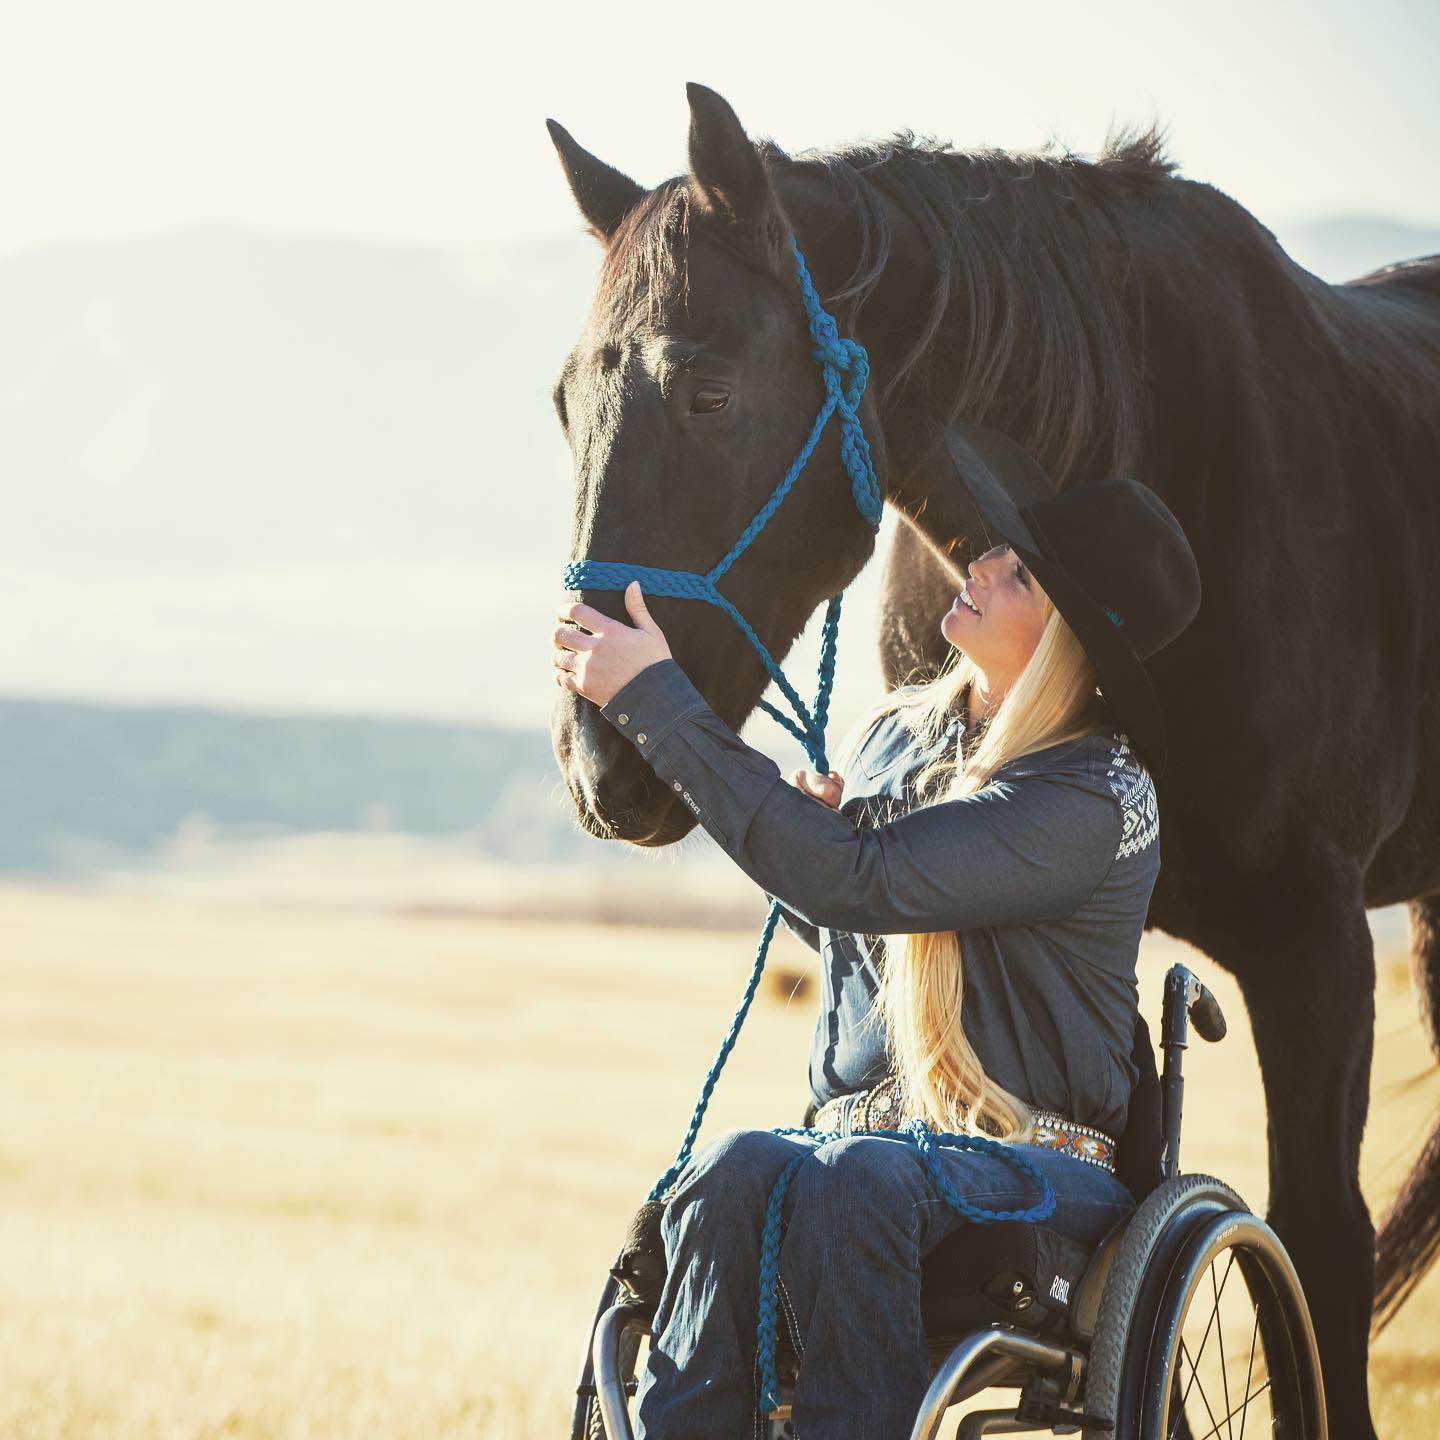 A Paralyzed Riders Mission to Become World Champion